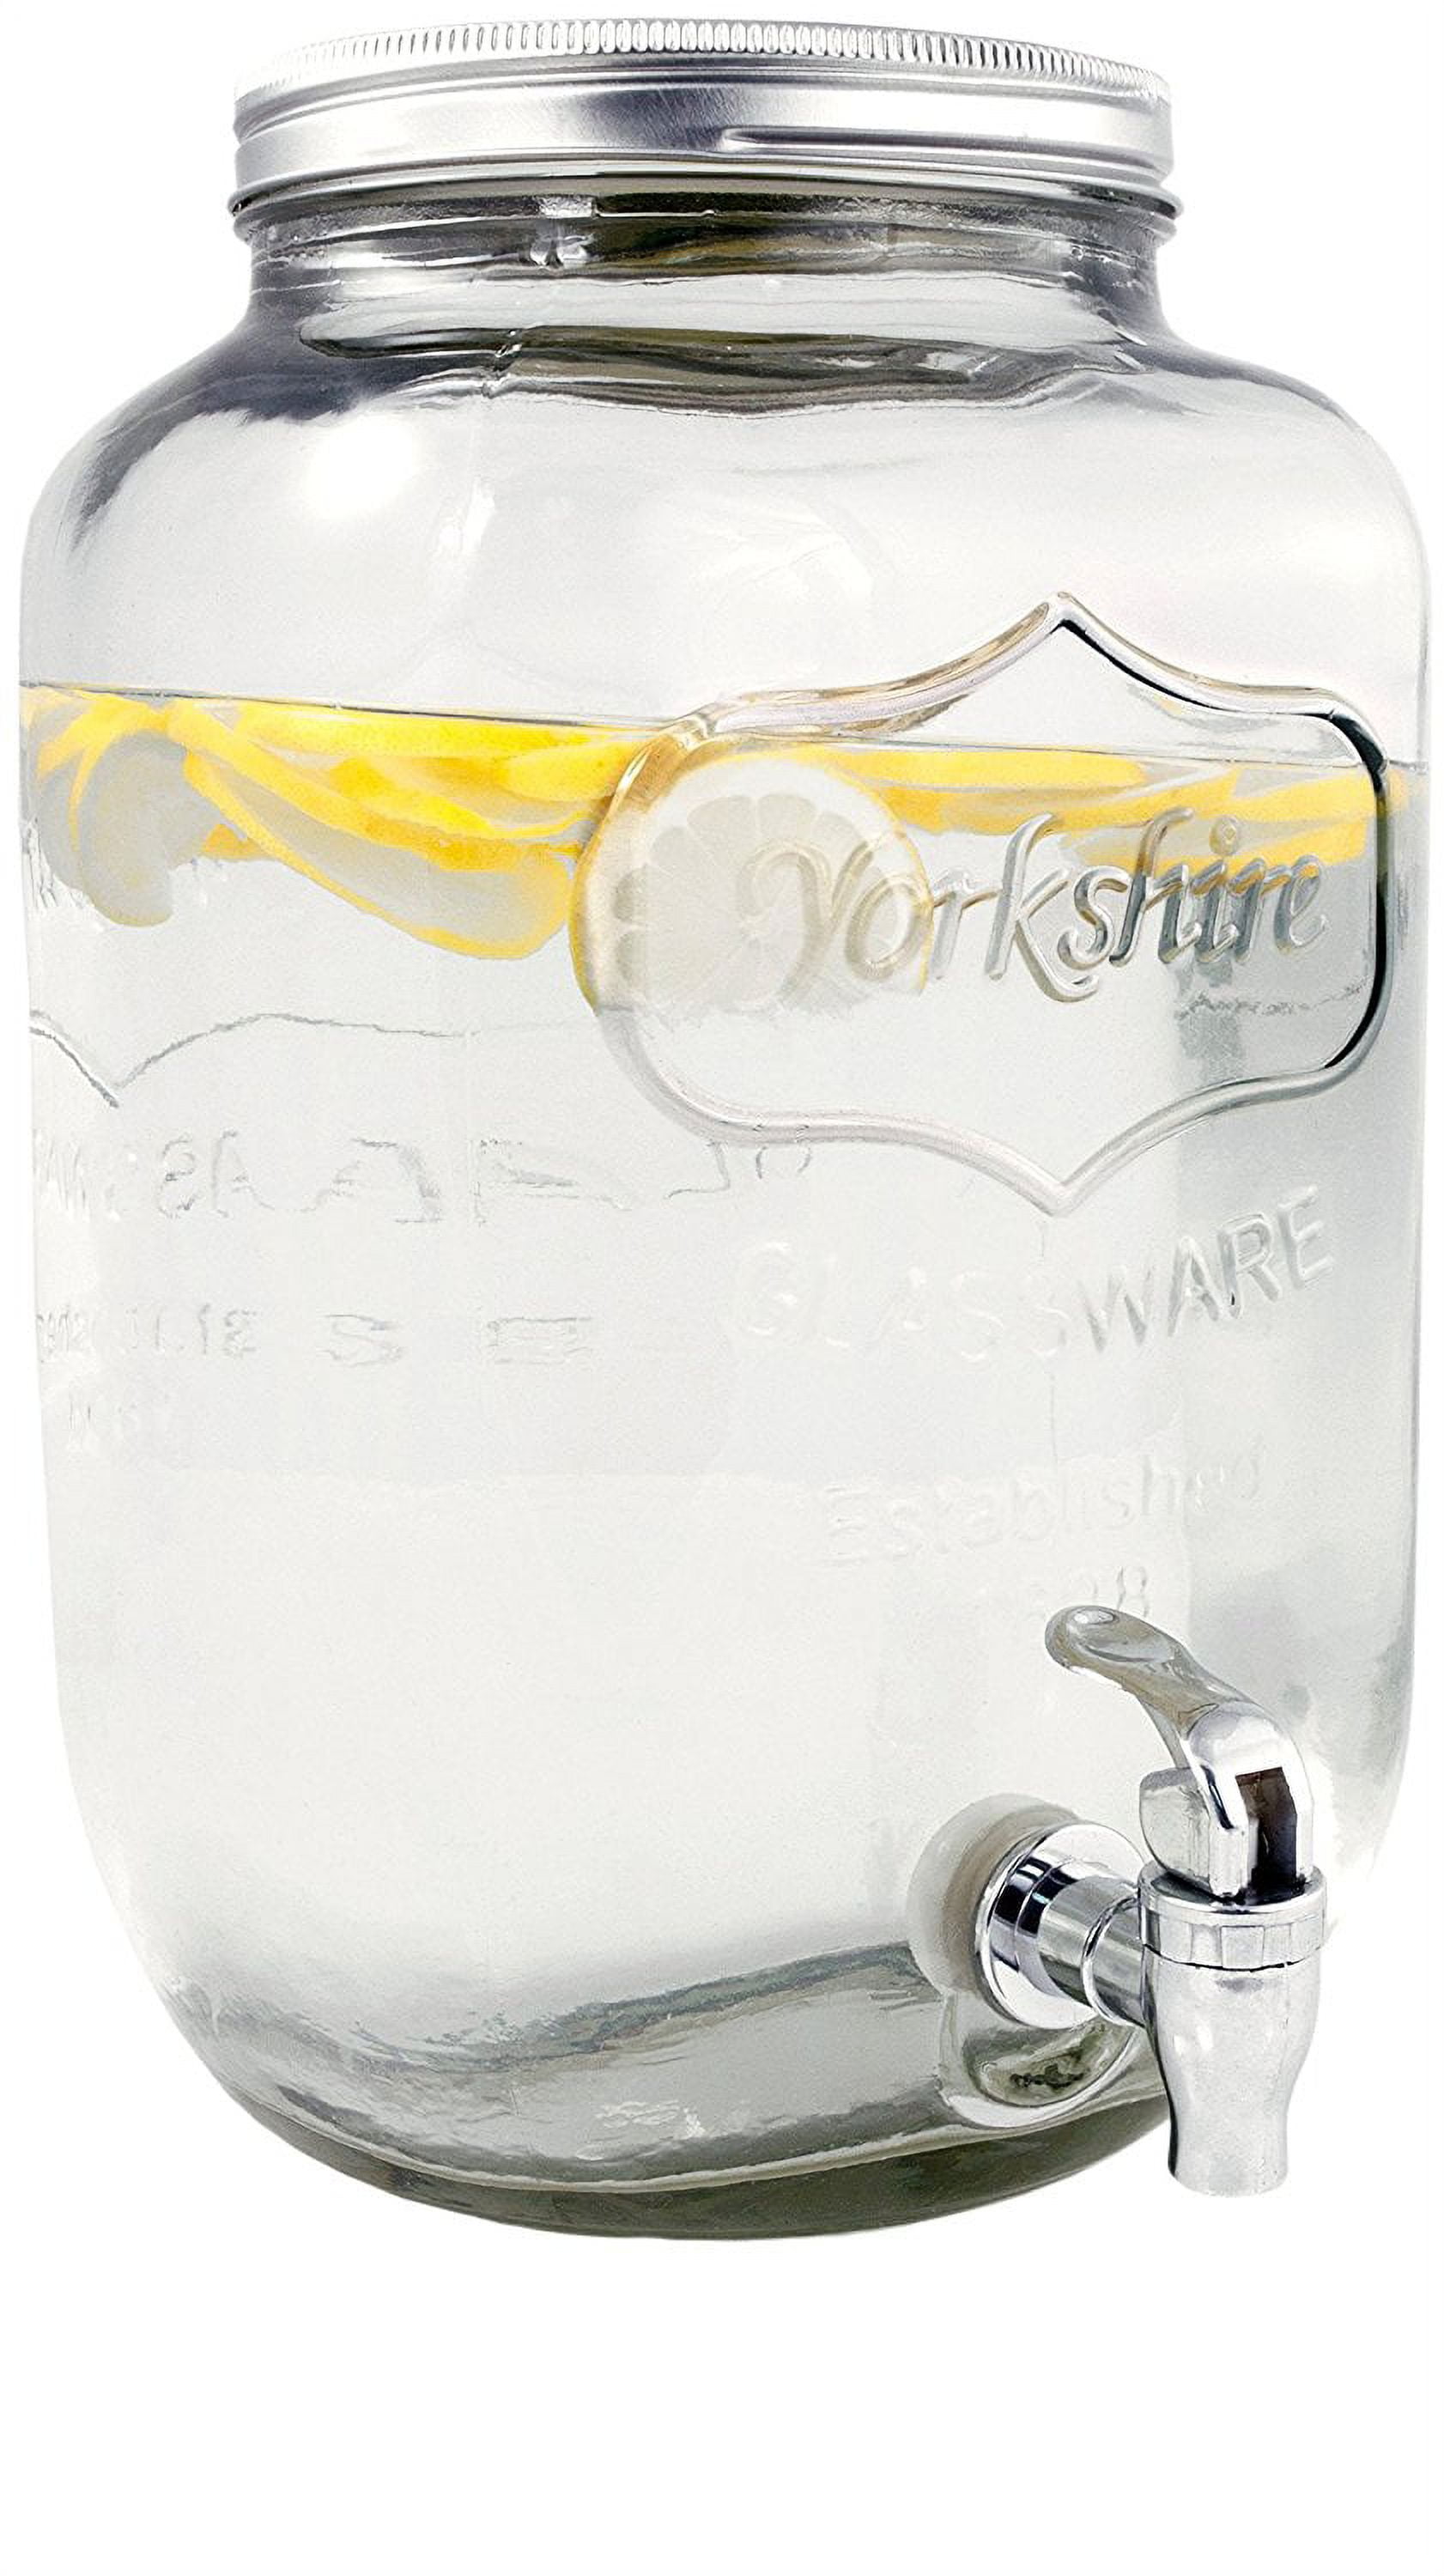 1-Gallon Mini Yorkshire Glass Beverage Dispenser, Clear Sold by at Home